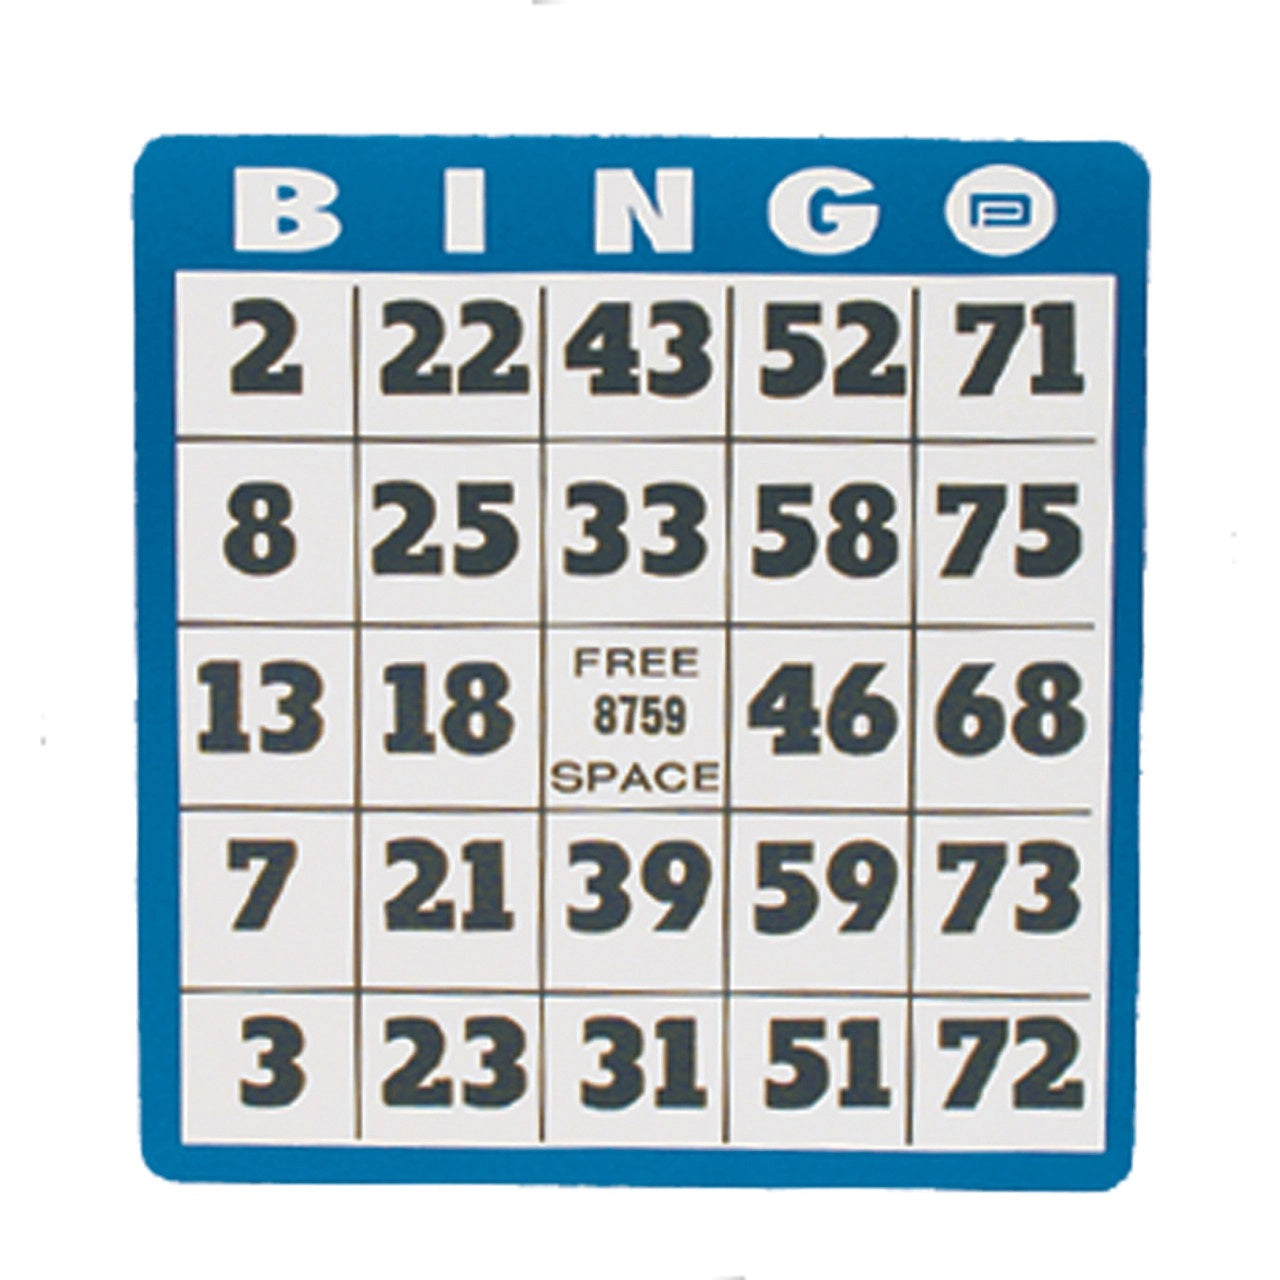 Large Print Bingo Card (individual) with black letters on a white background with blue trim.  Large low vision card.